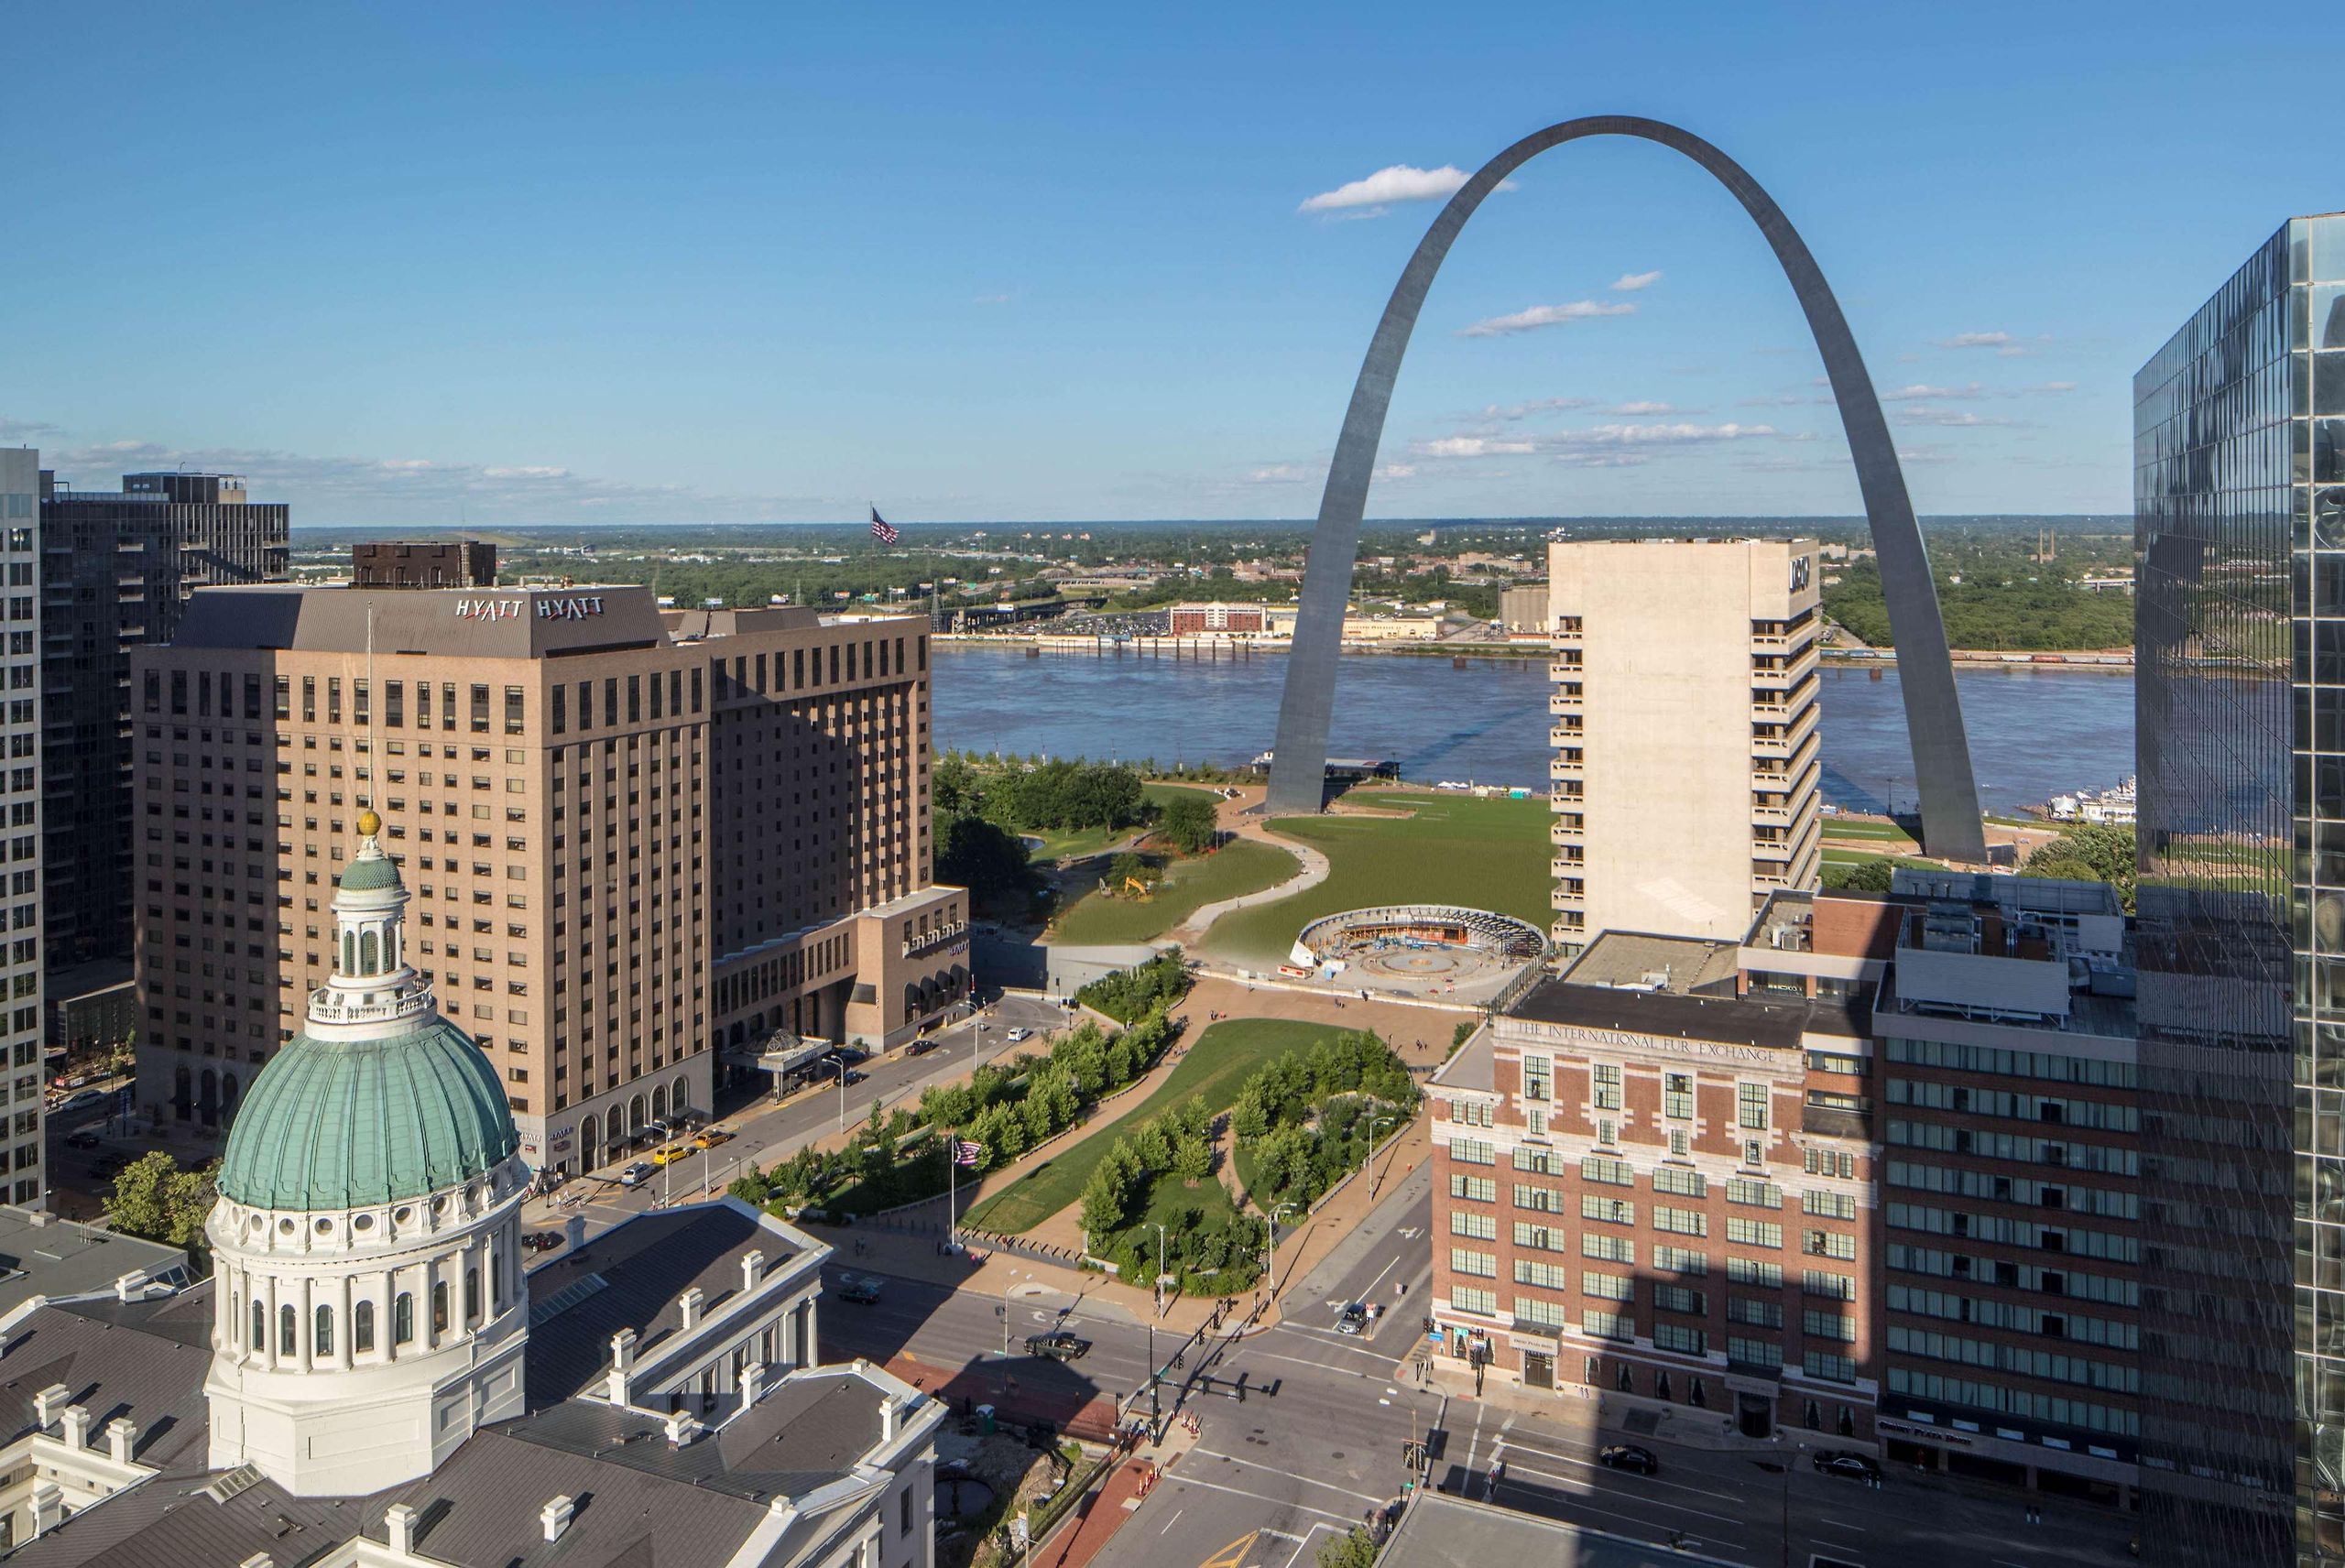 Aerial view of St. Louis, Missouri and the Arch on the river front